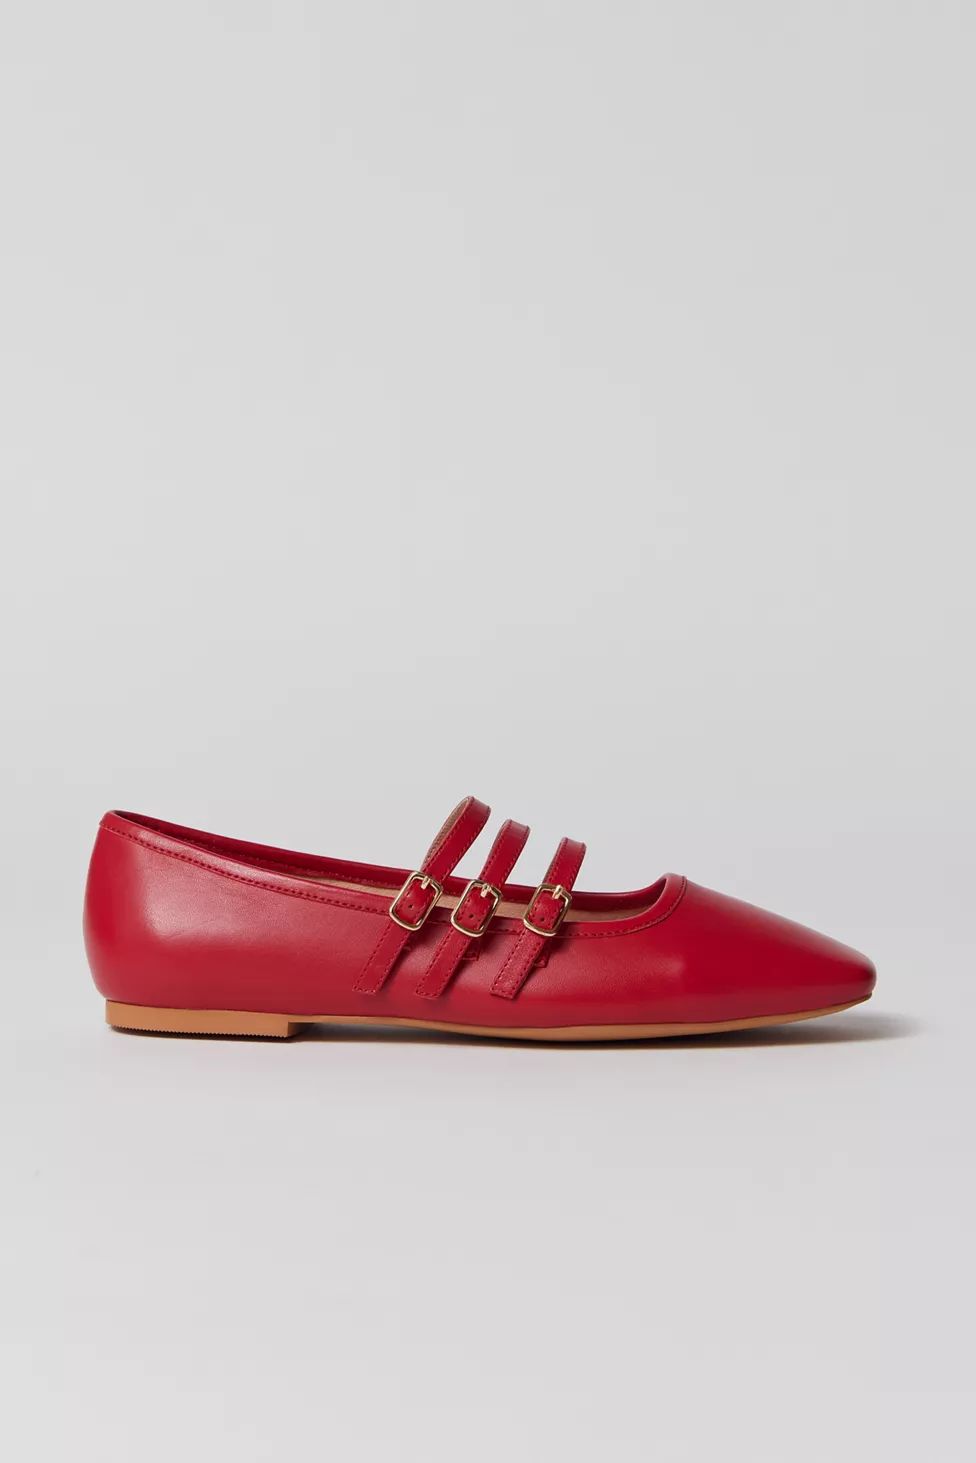 Matisse Footwear Nova Ballet Flat | Urban Outfitters (US and RoW)